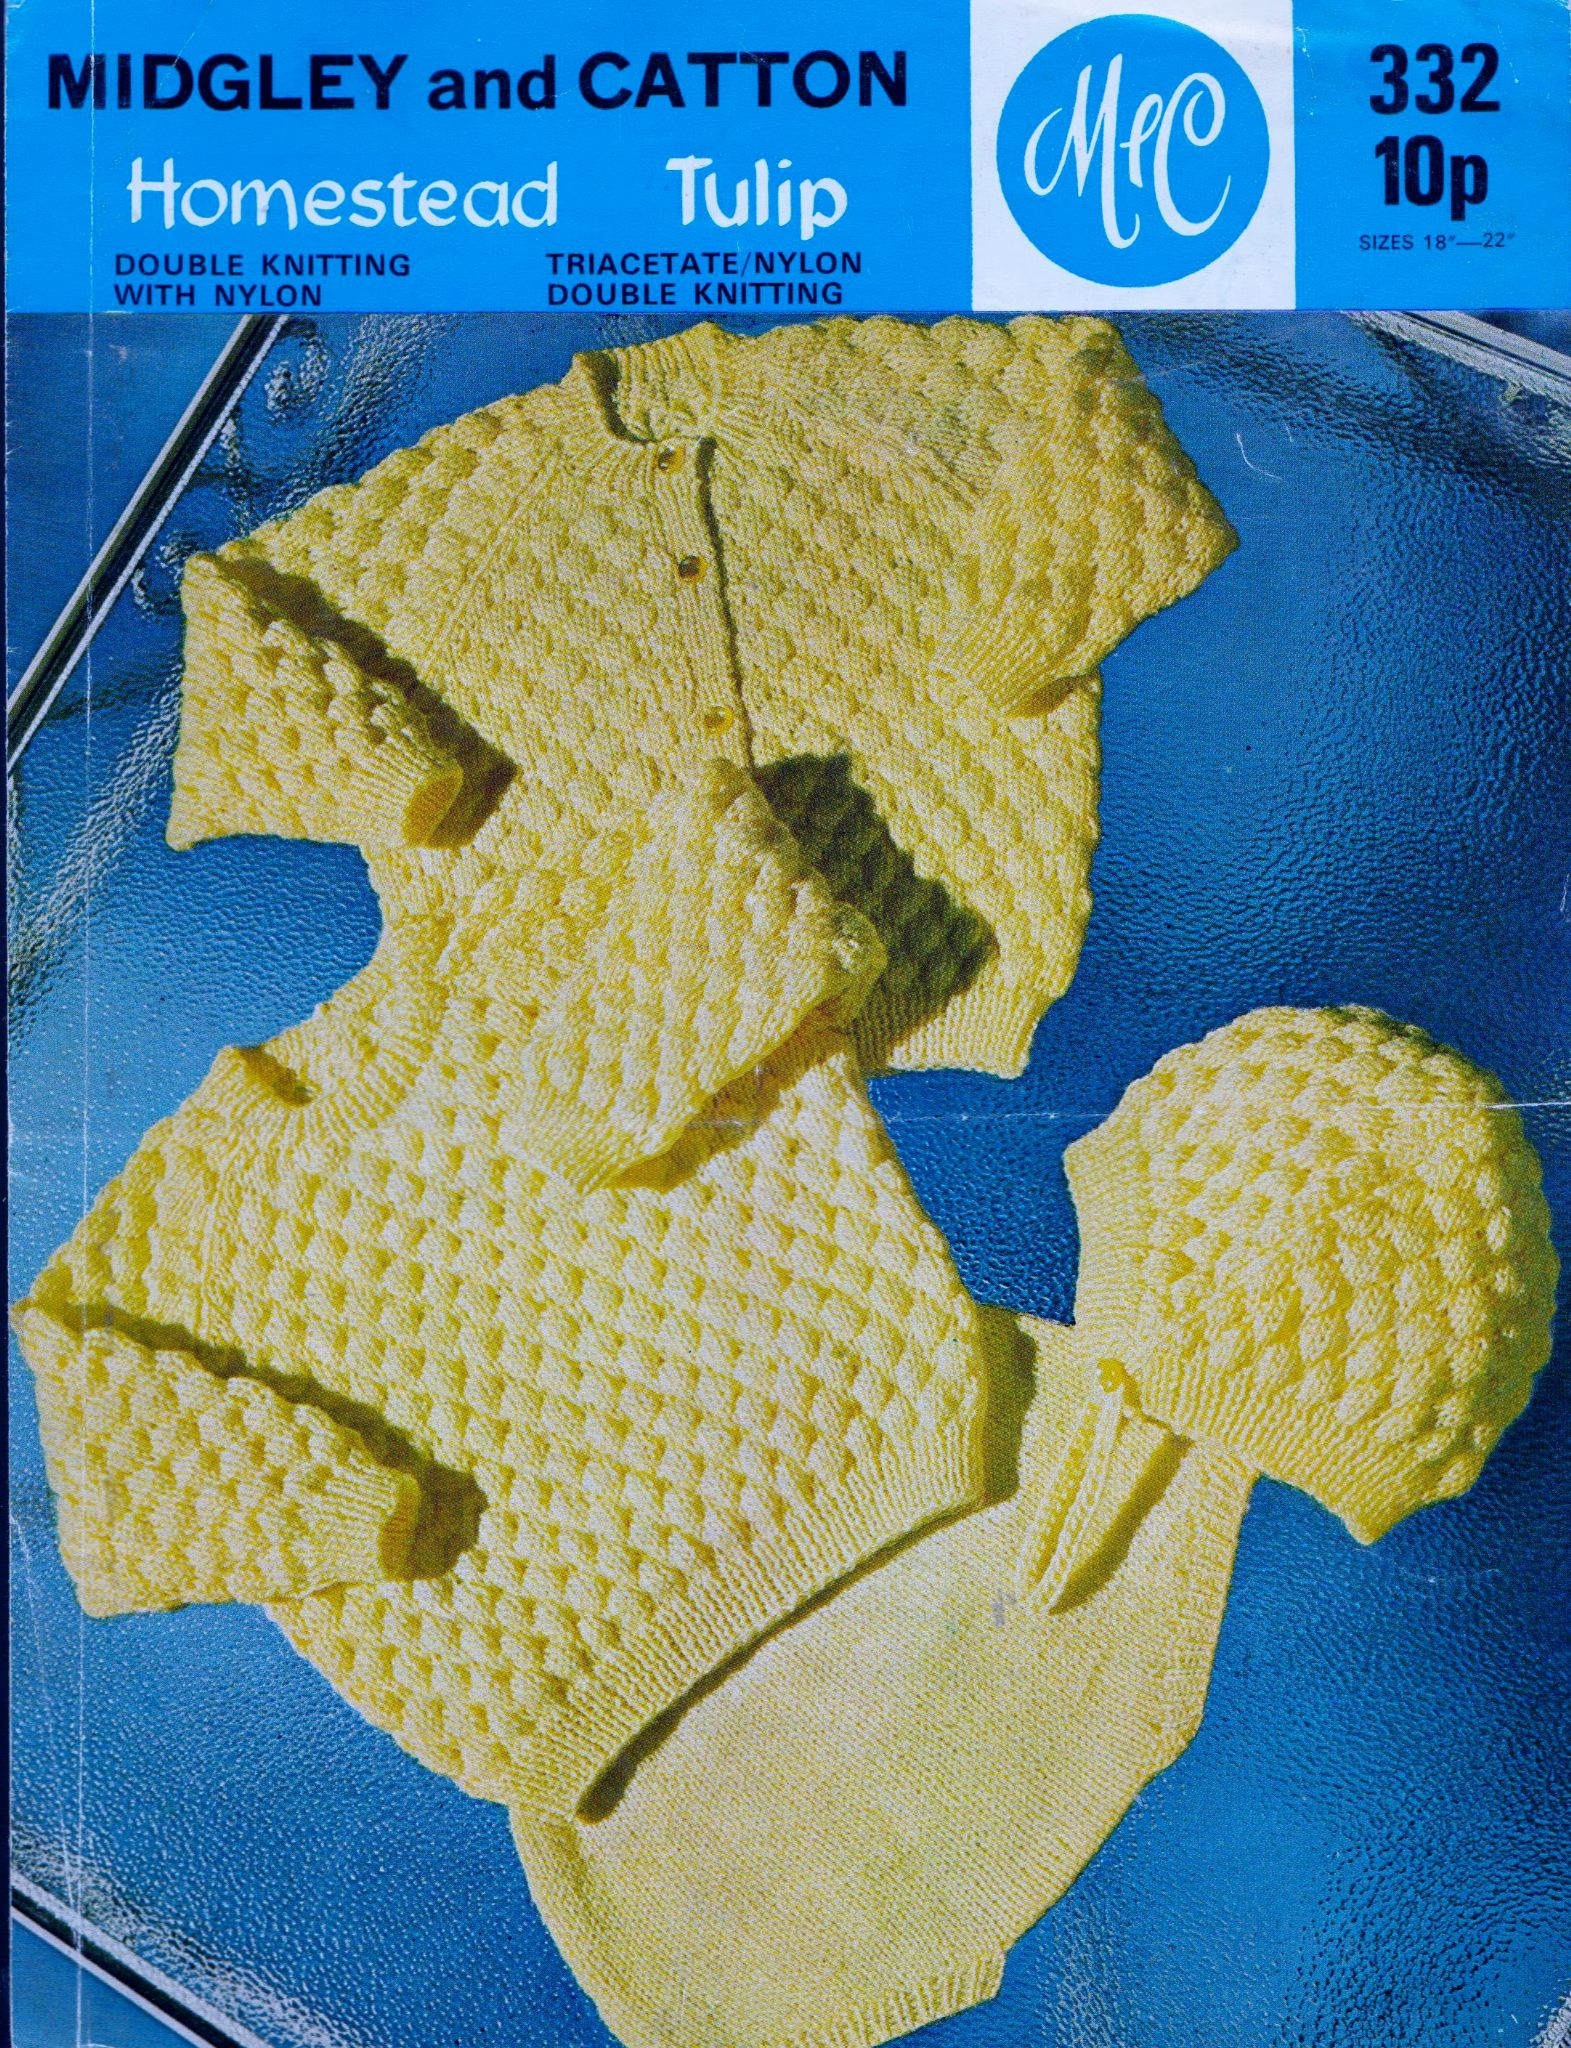 Knitting Patterns Original Vintage Knitting Pattern To Make A Ba Sweater Cardigan Pilch And Cap Chest 18 22 In Double Knitting Pcmc332